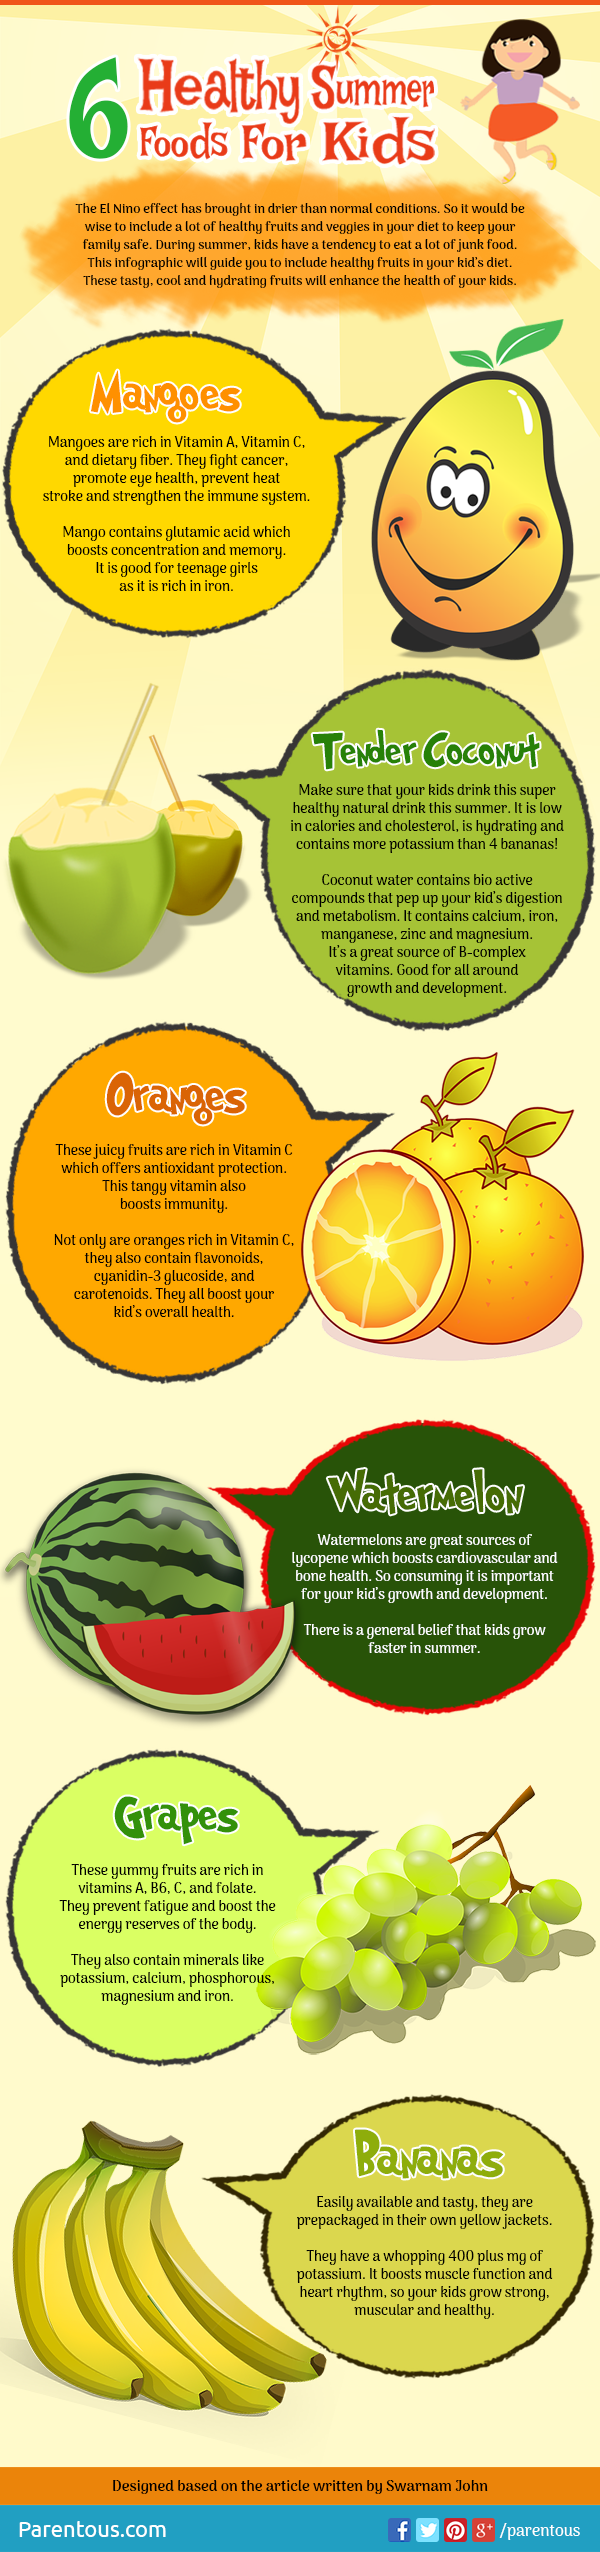 Healthy Summer Foods For Kids - Infographic